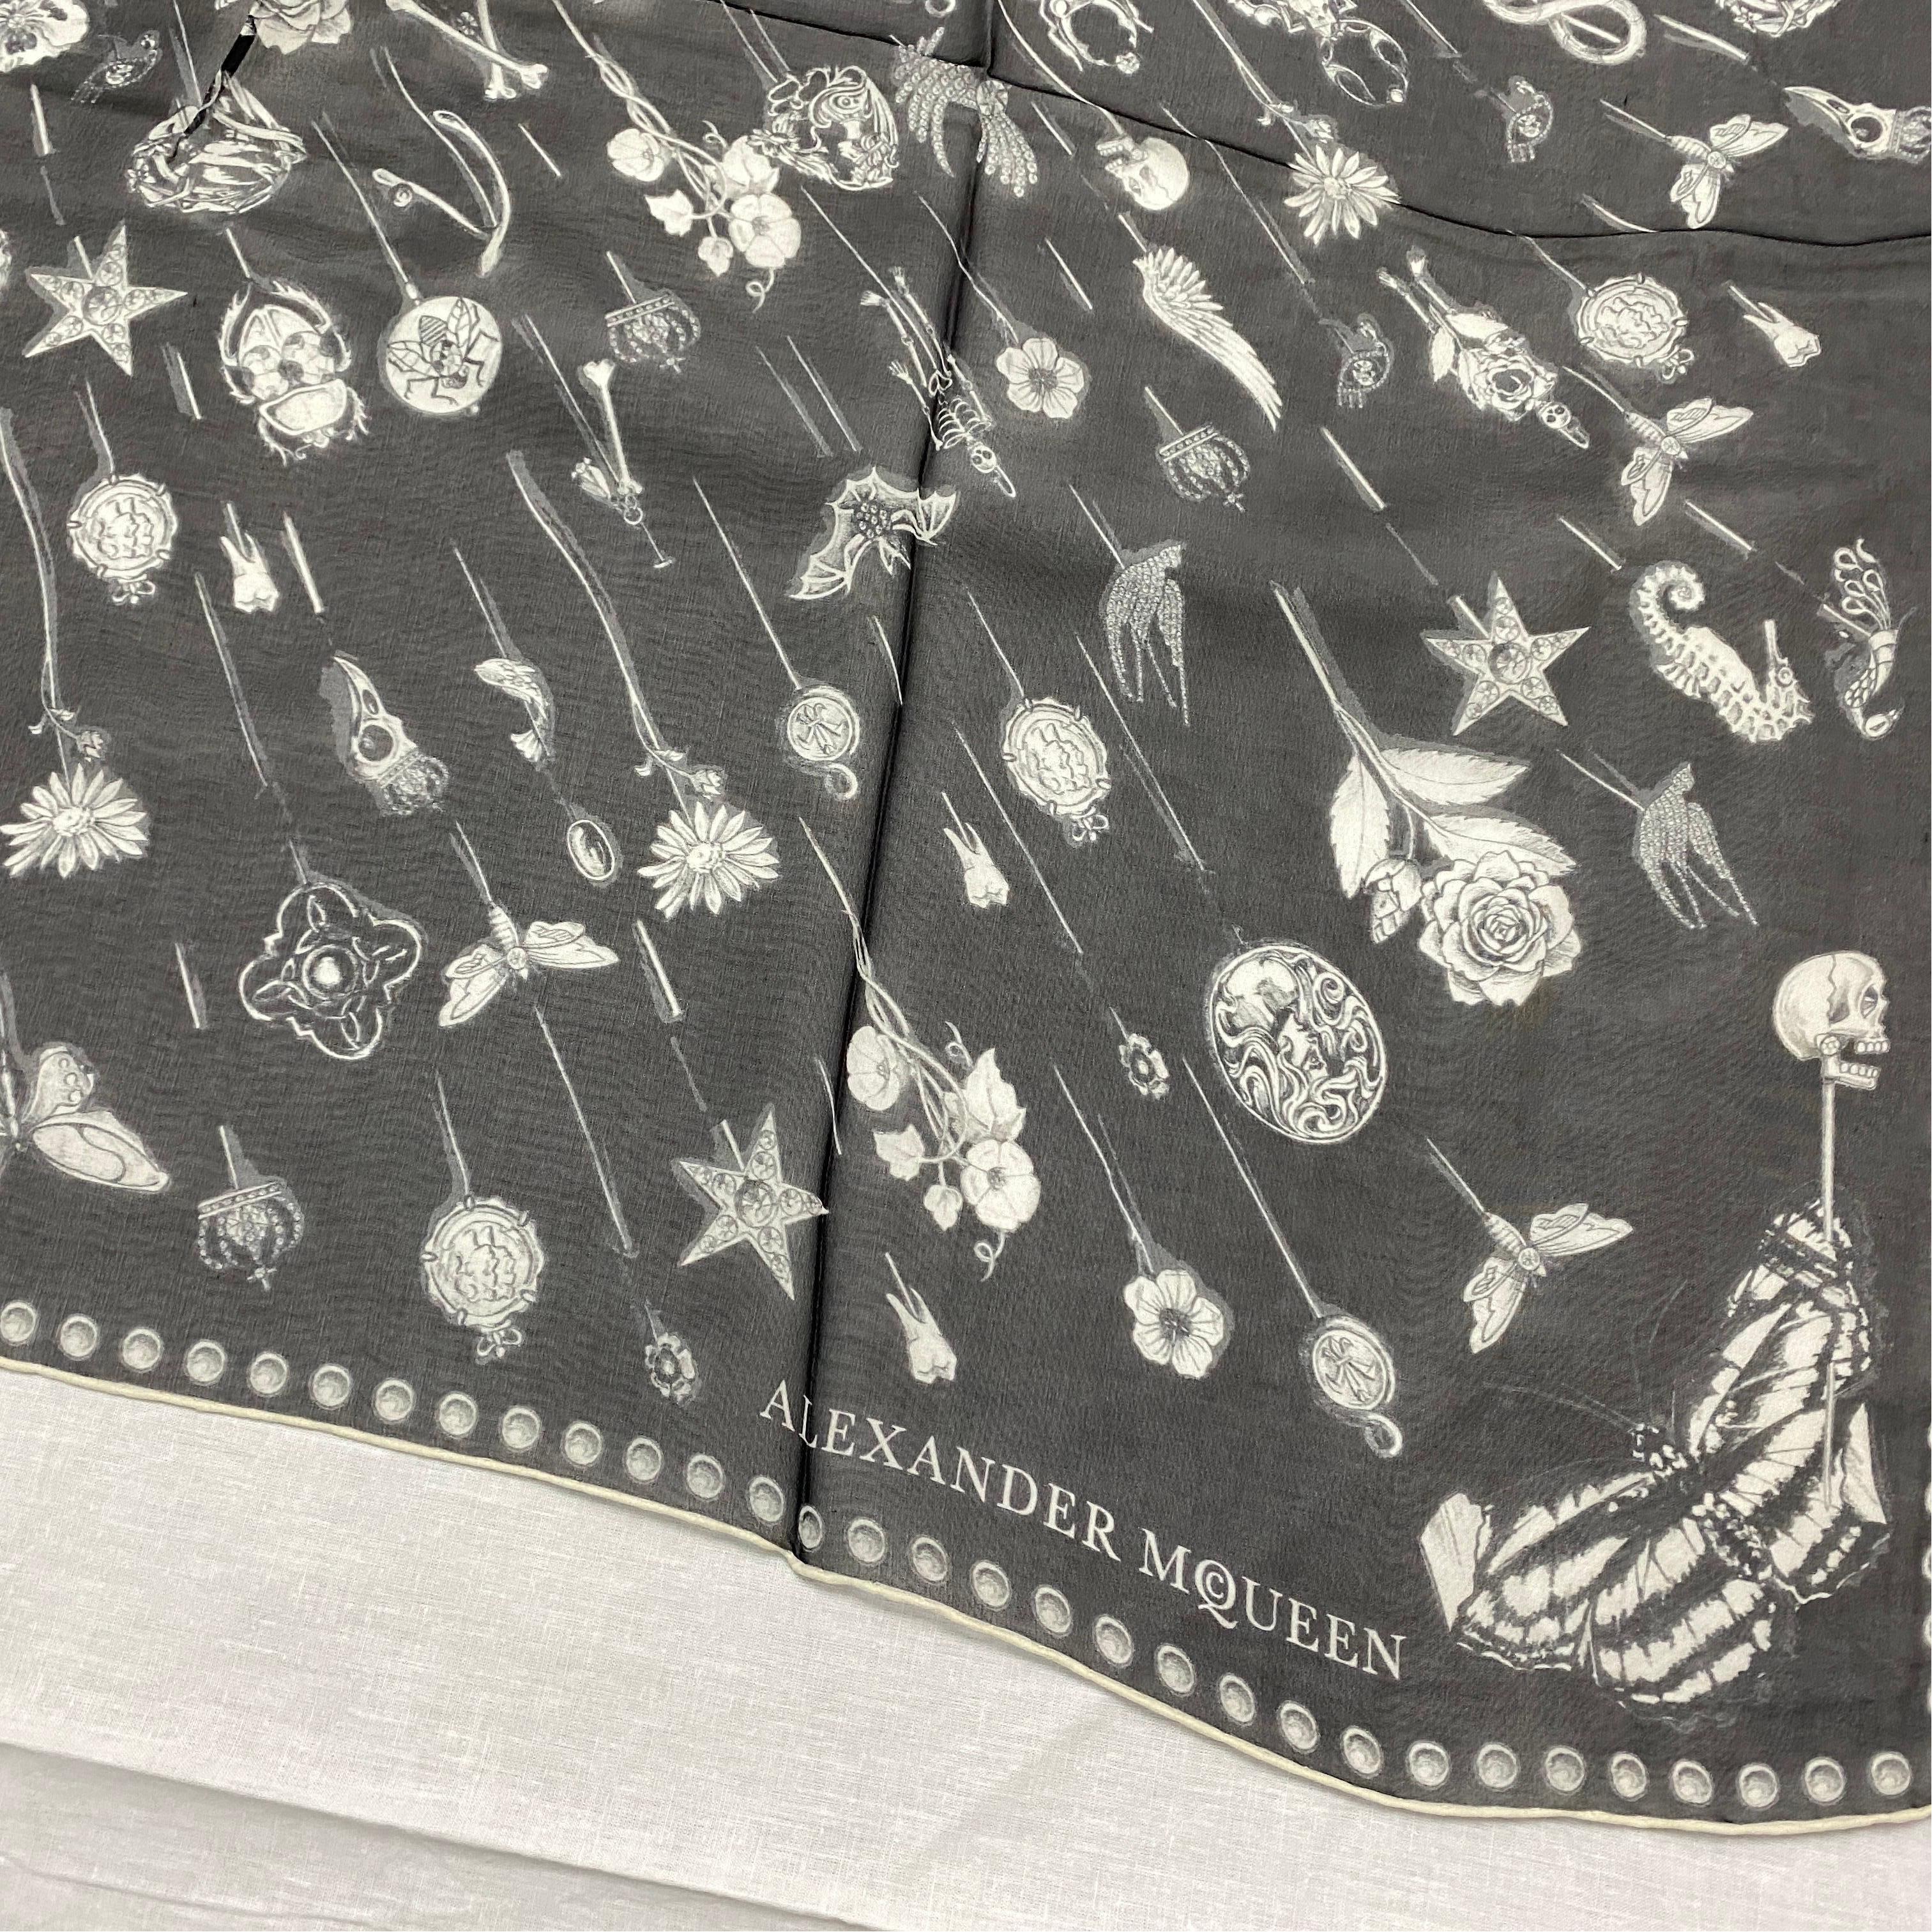 White Skulls Animal and Flowers on Black Silk Scarf by Alexander McQueen 1